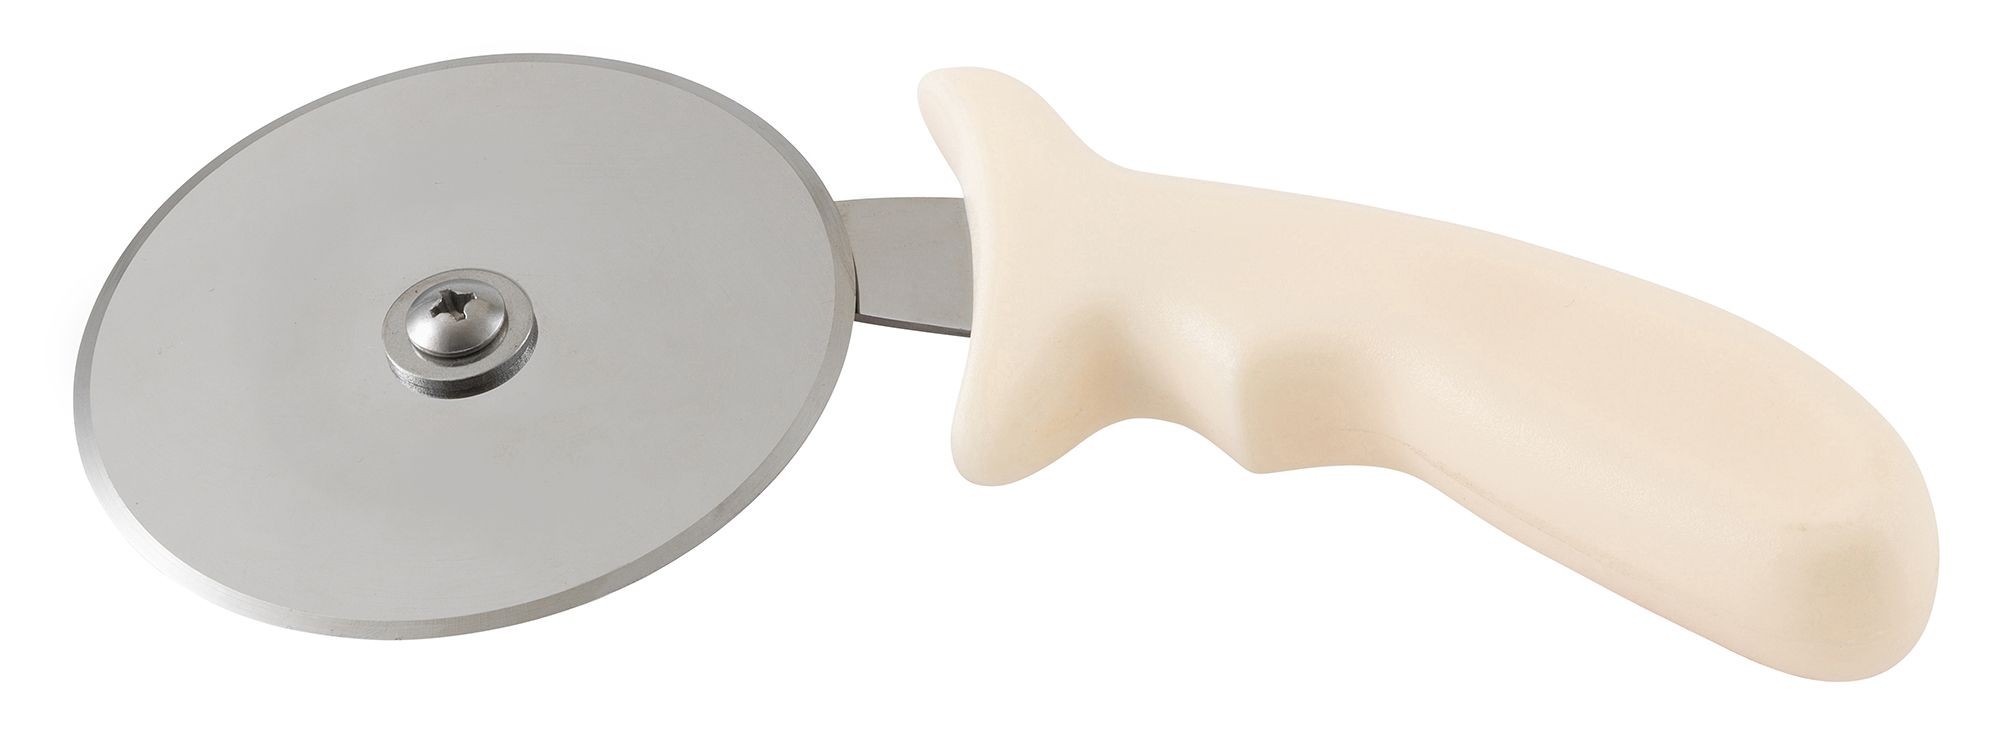 https://www.lionsdeal.com/itempics/Winco-PPC-4W-Pizza-Cutter-with-White-Plastic-Handle-4-quot--Dia-Blade-38286_xlarge.jpg